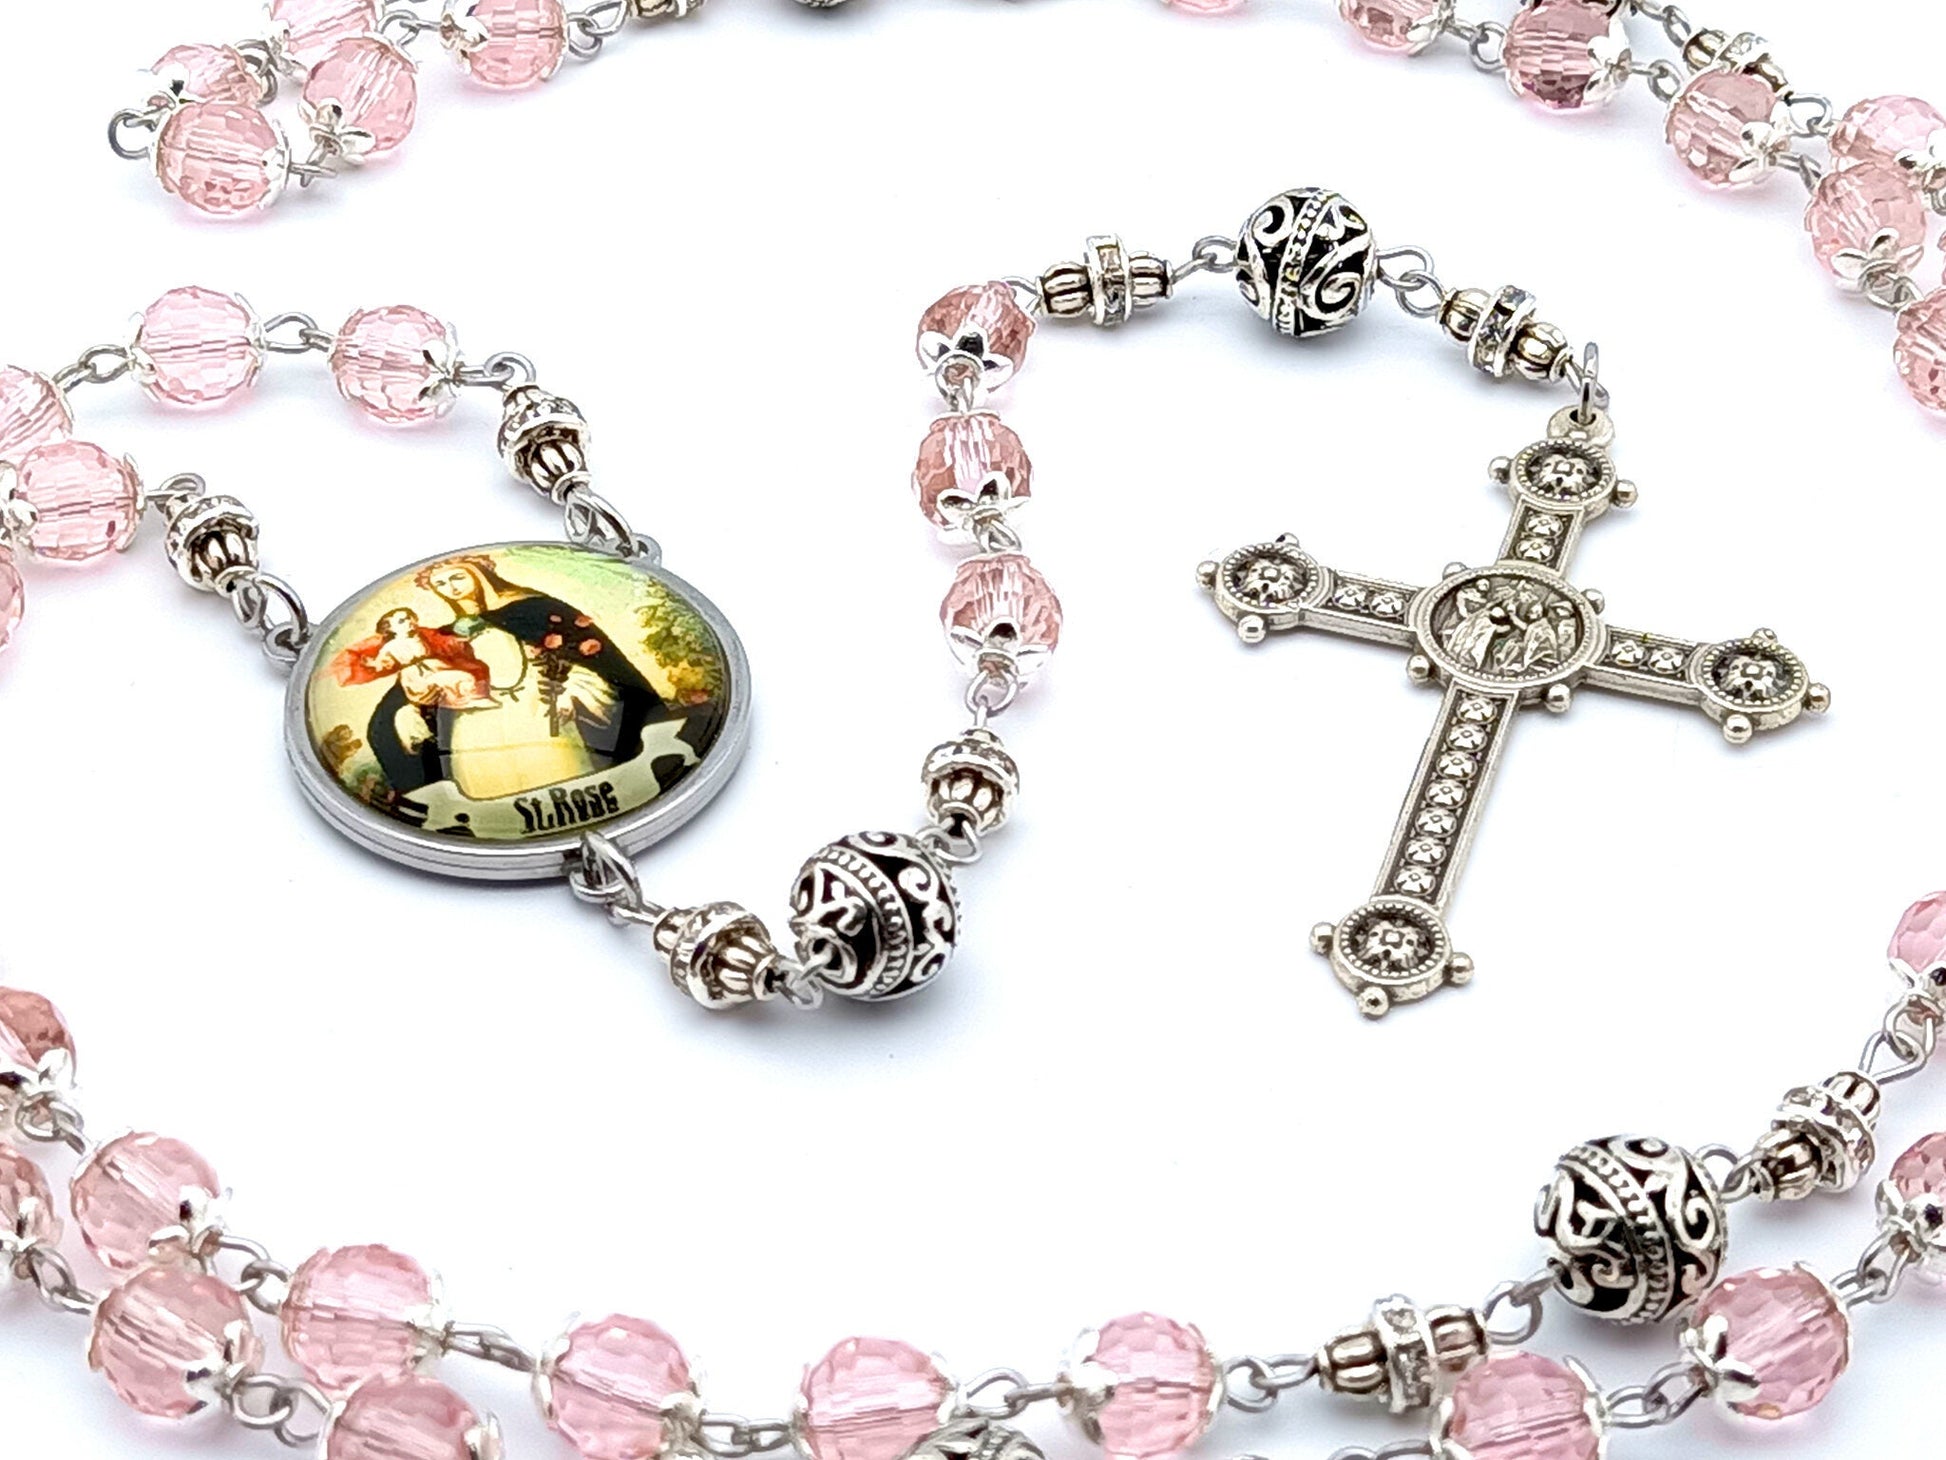 Saint Rose unique rosary beads with pink faceted glass and silver beads, silver crucifix and picture centre medal.